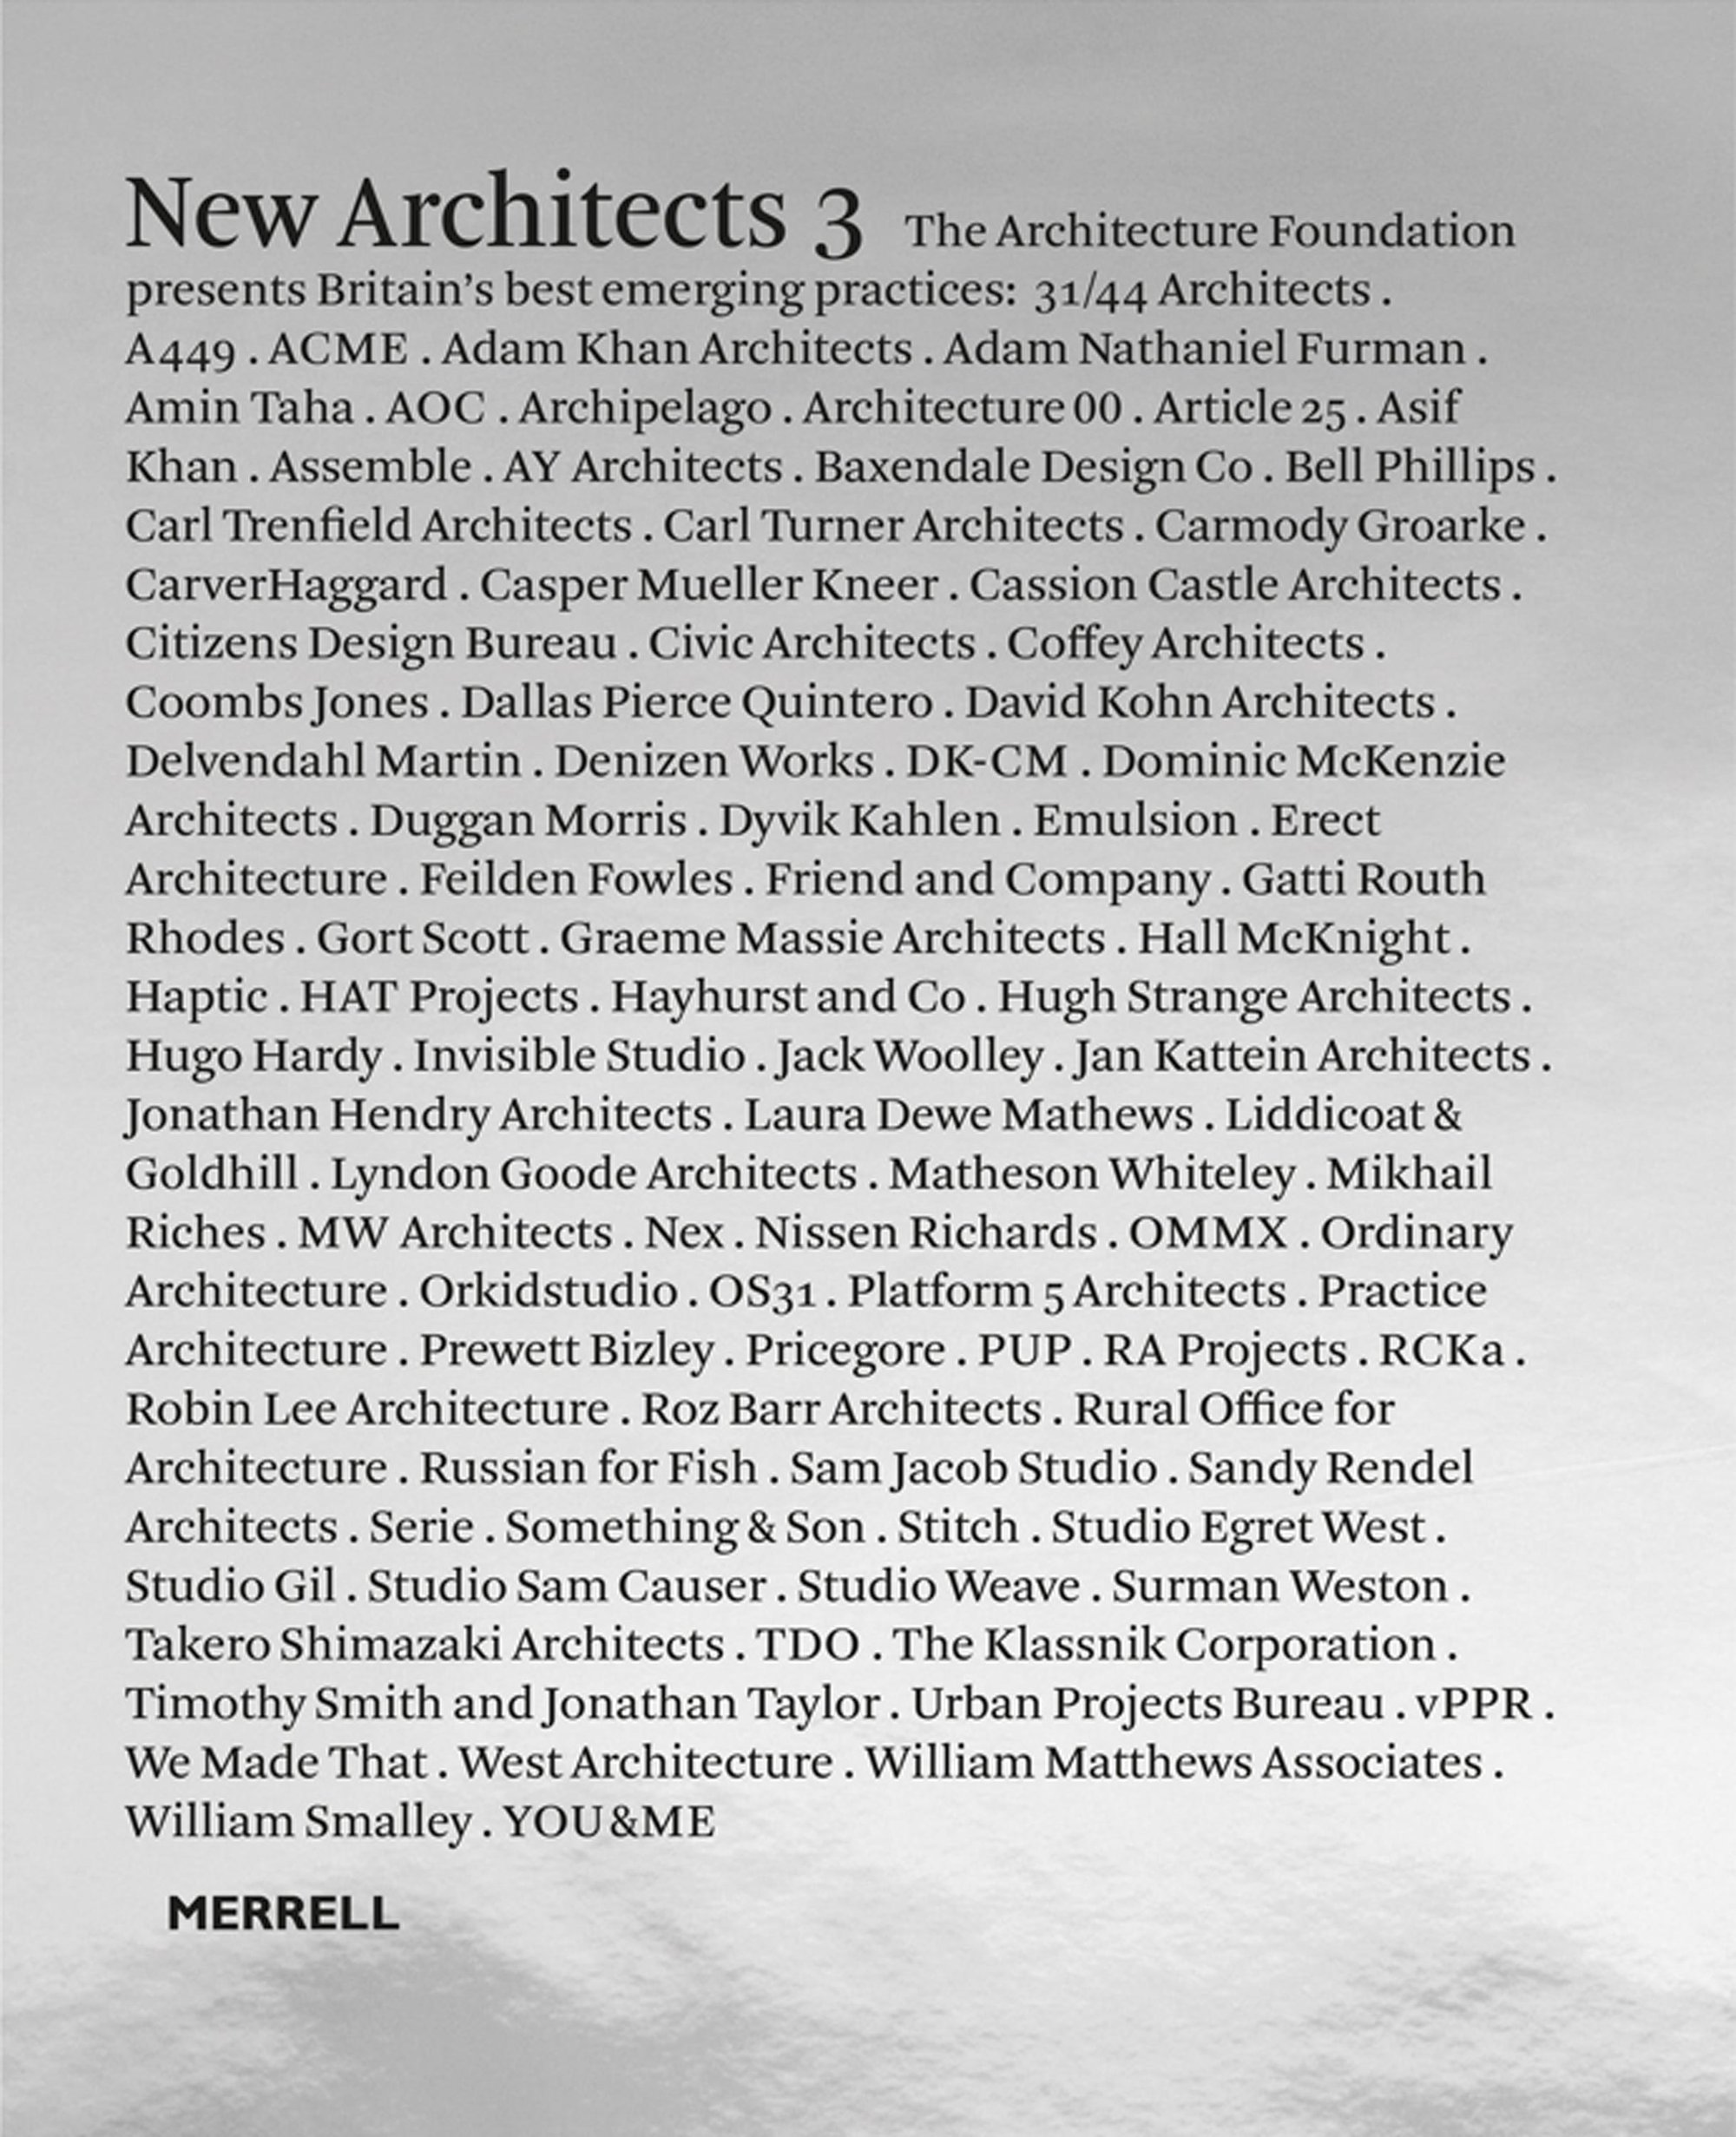 2016_NewArchitects3_Cover.jpg